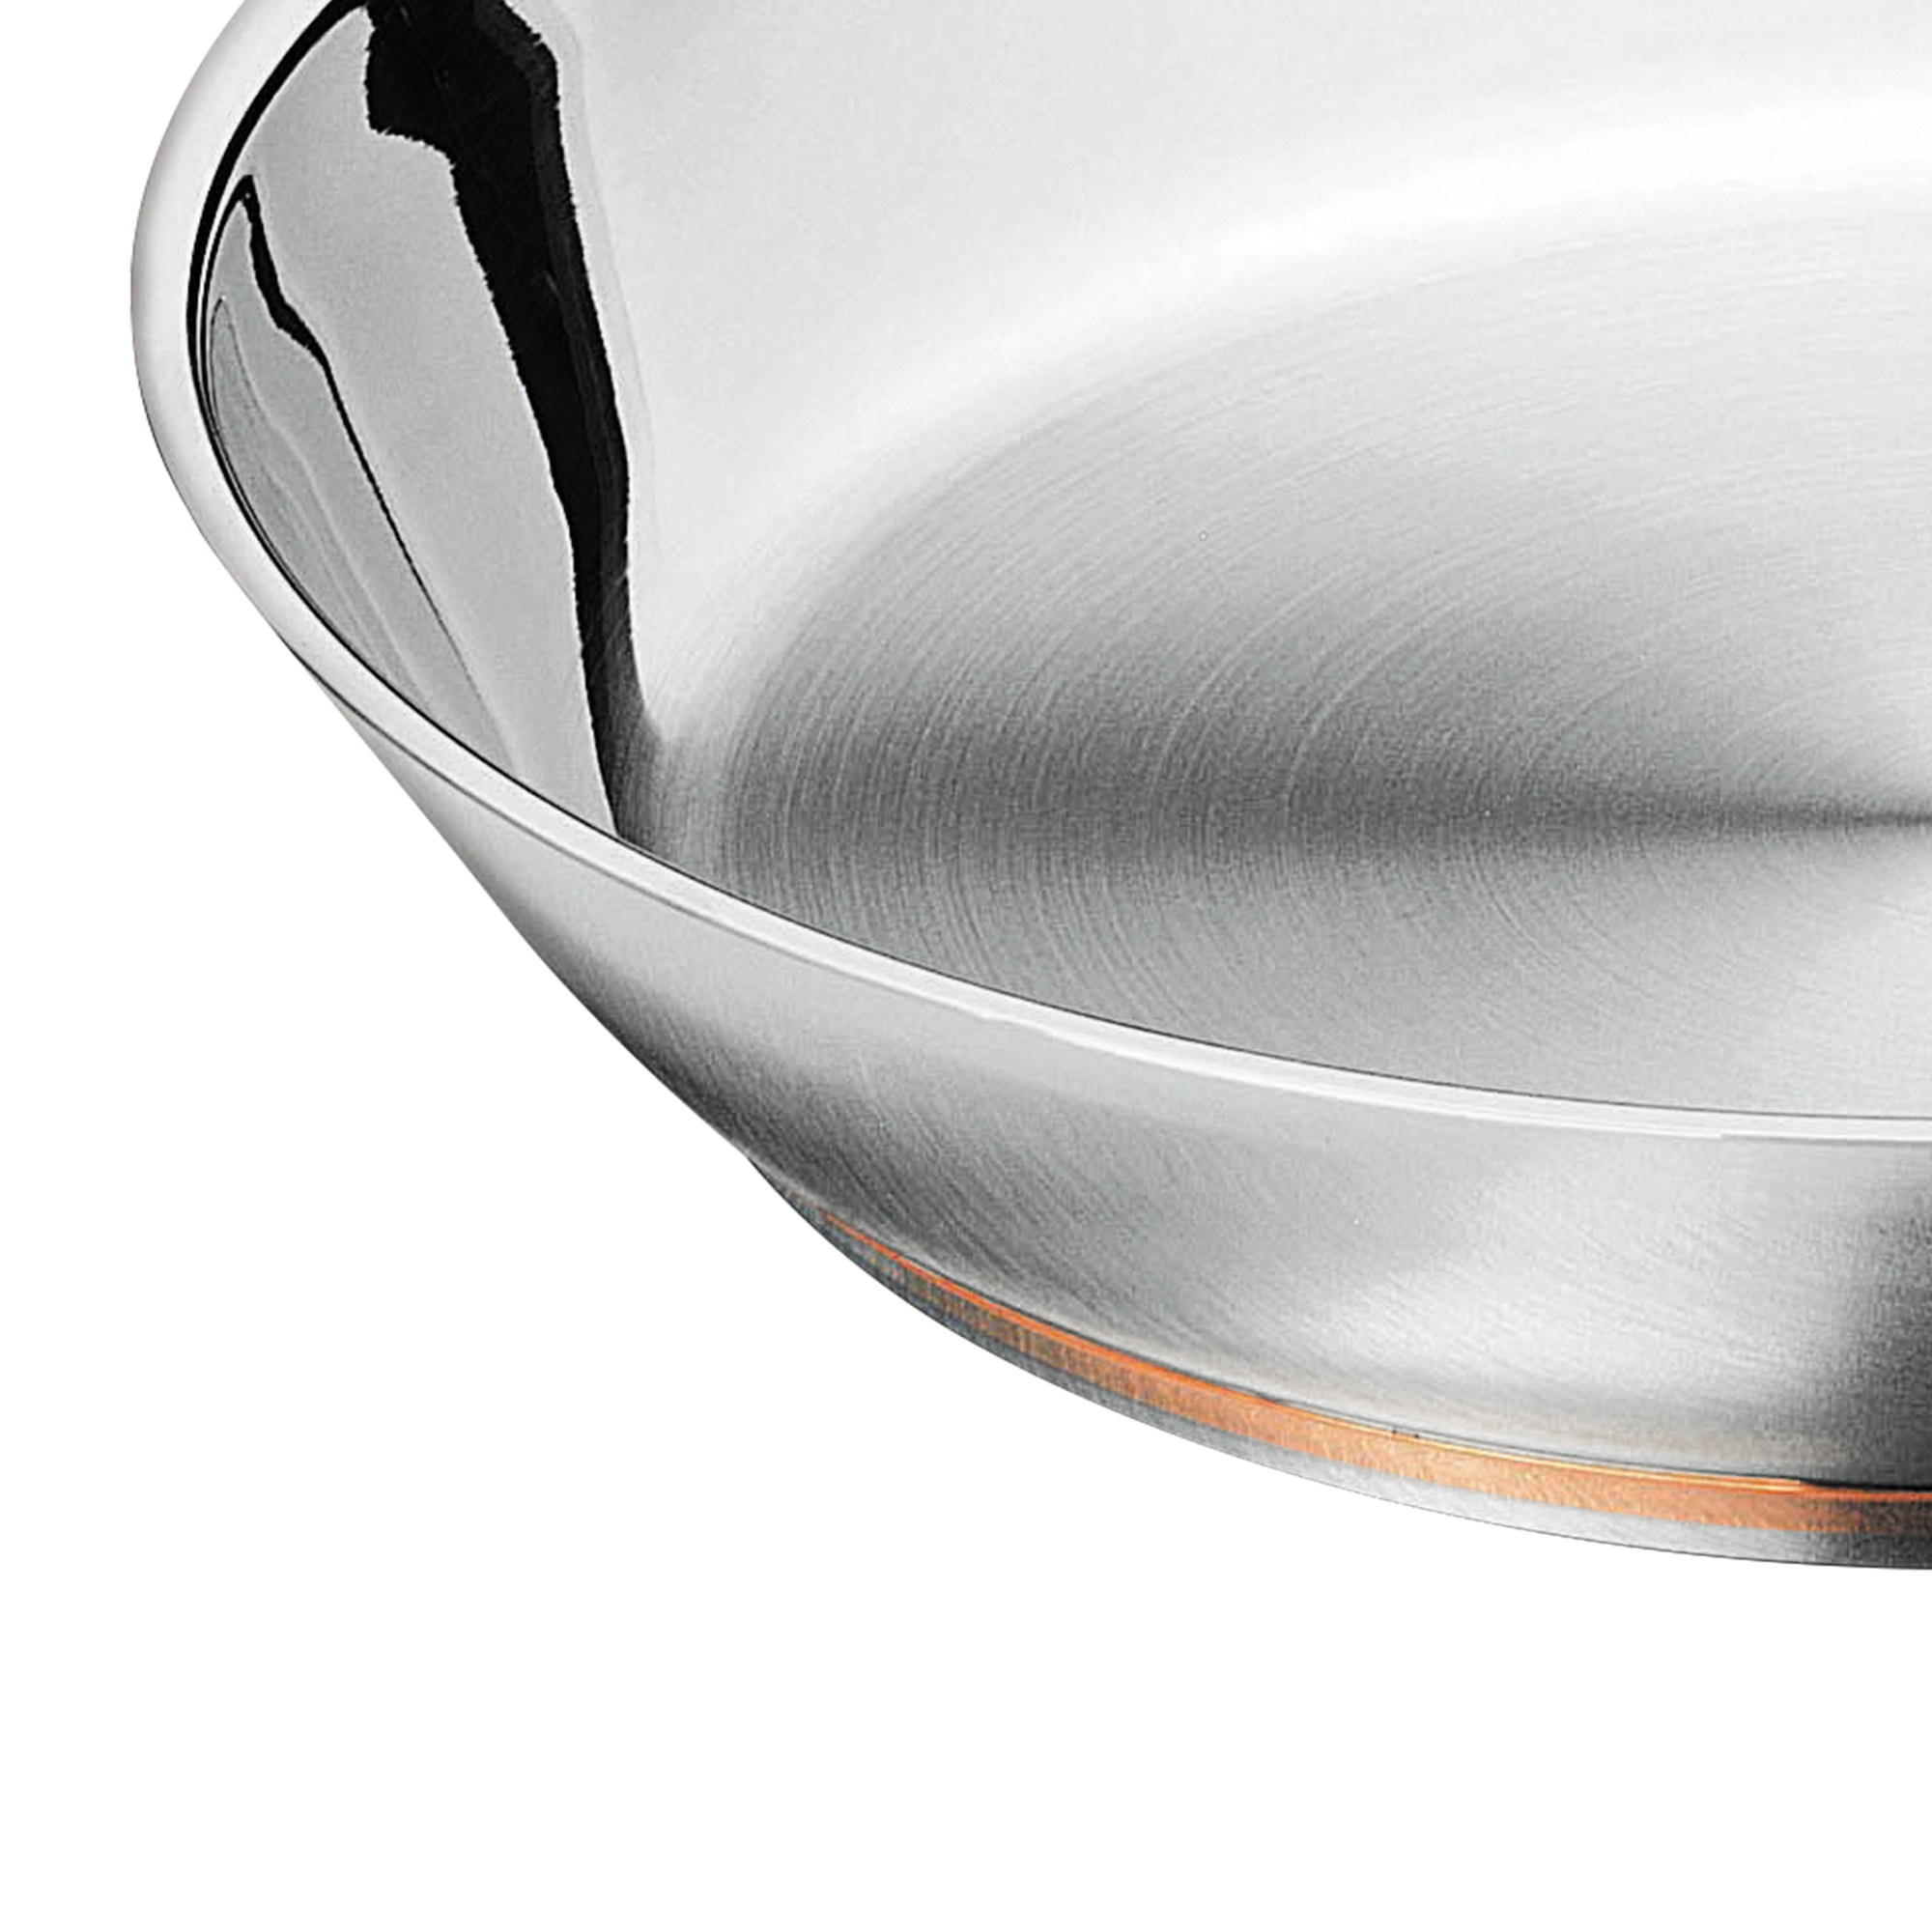 Scanpan Coppernox Stainless Steel Frypan 26cm Image 2